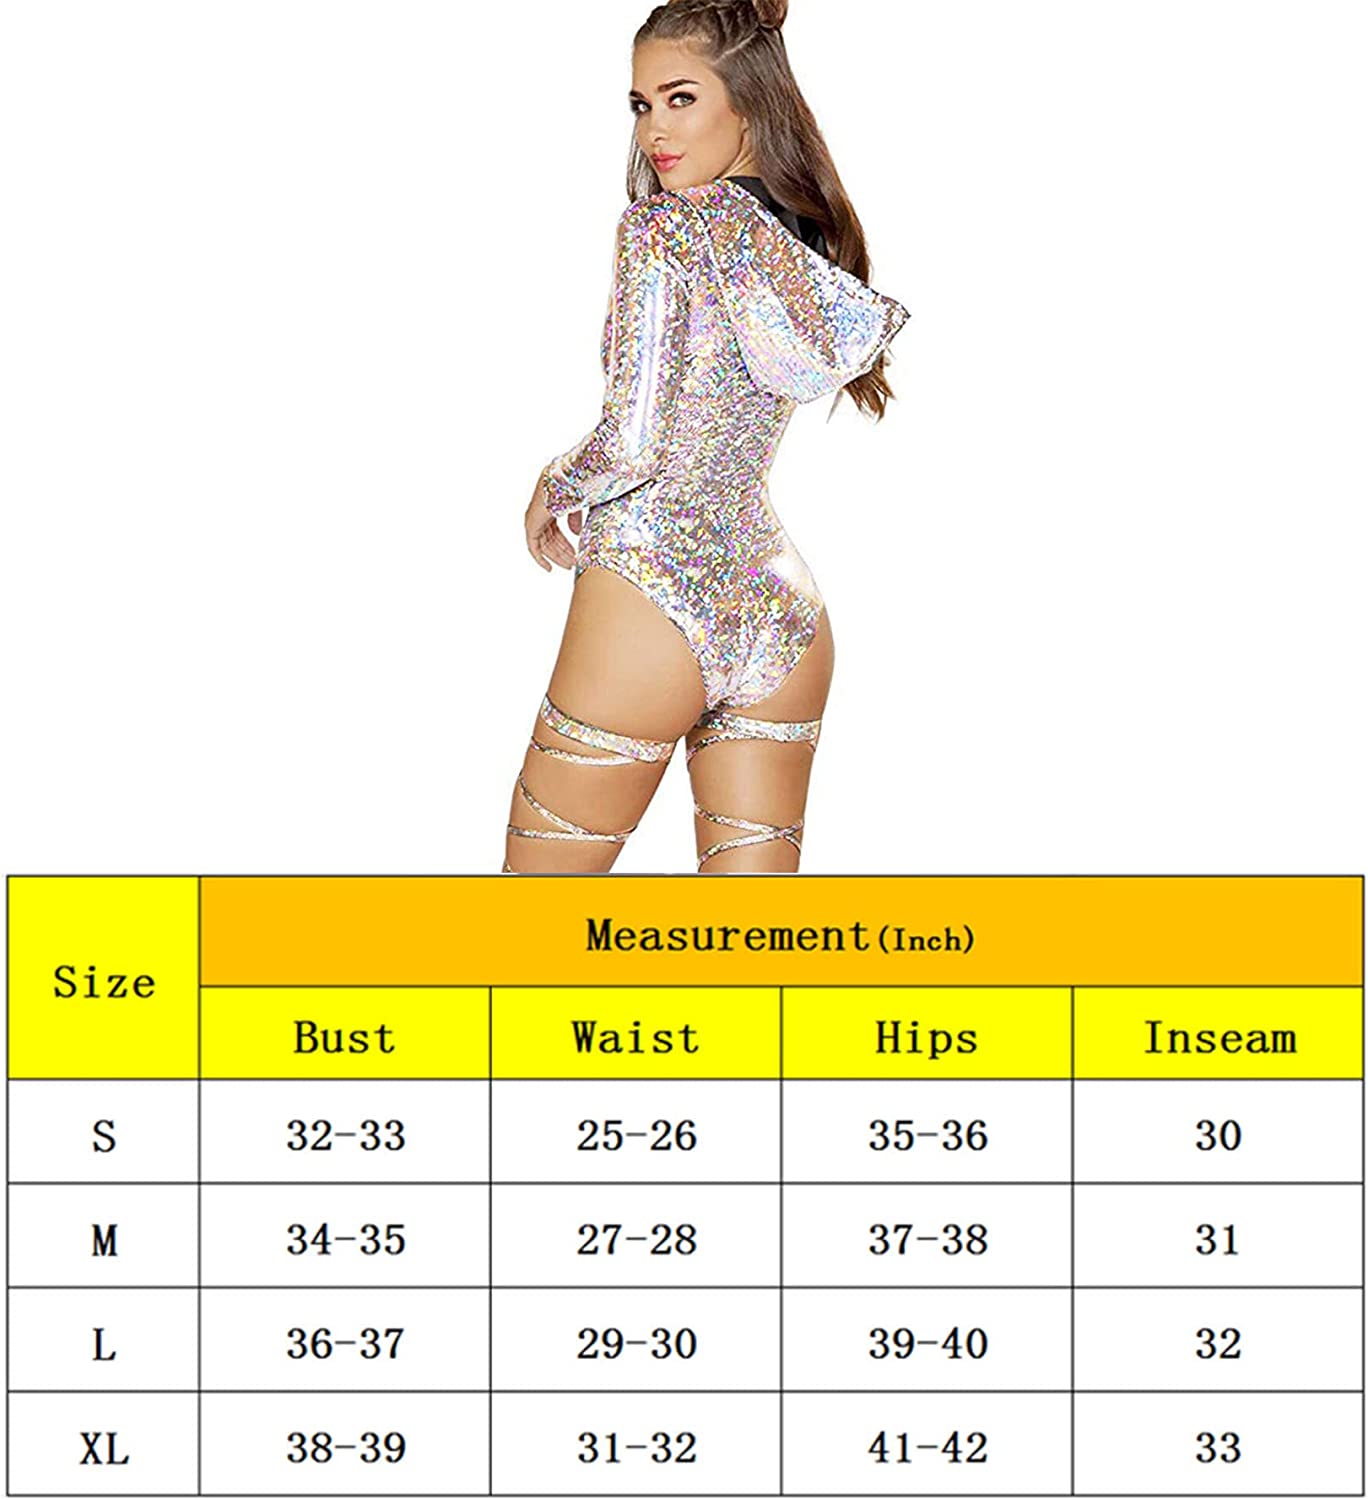 Mesh Bodysuit With a Hood, Womens Rave Outfits